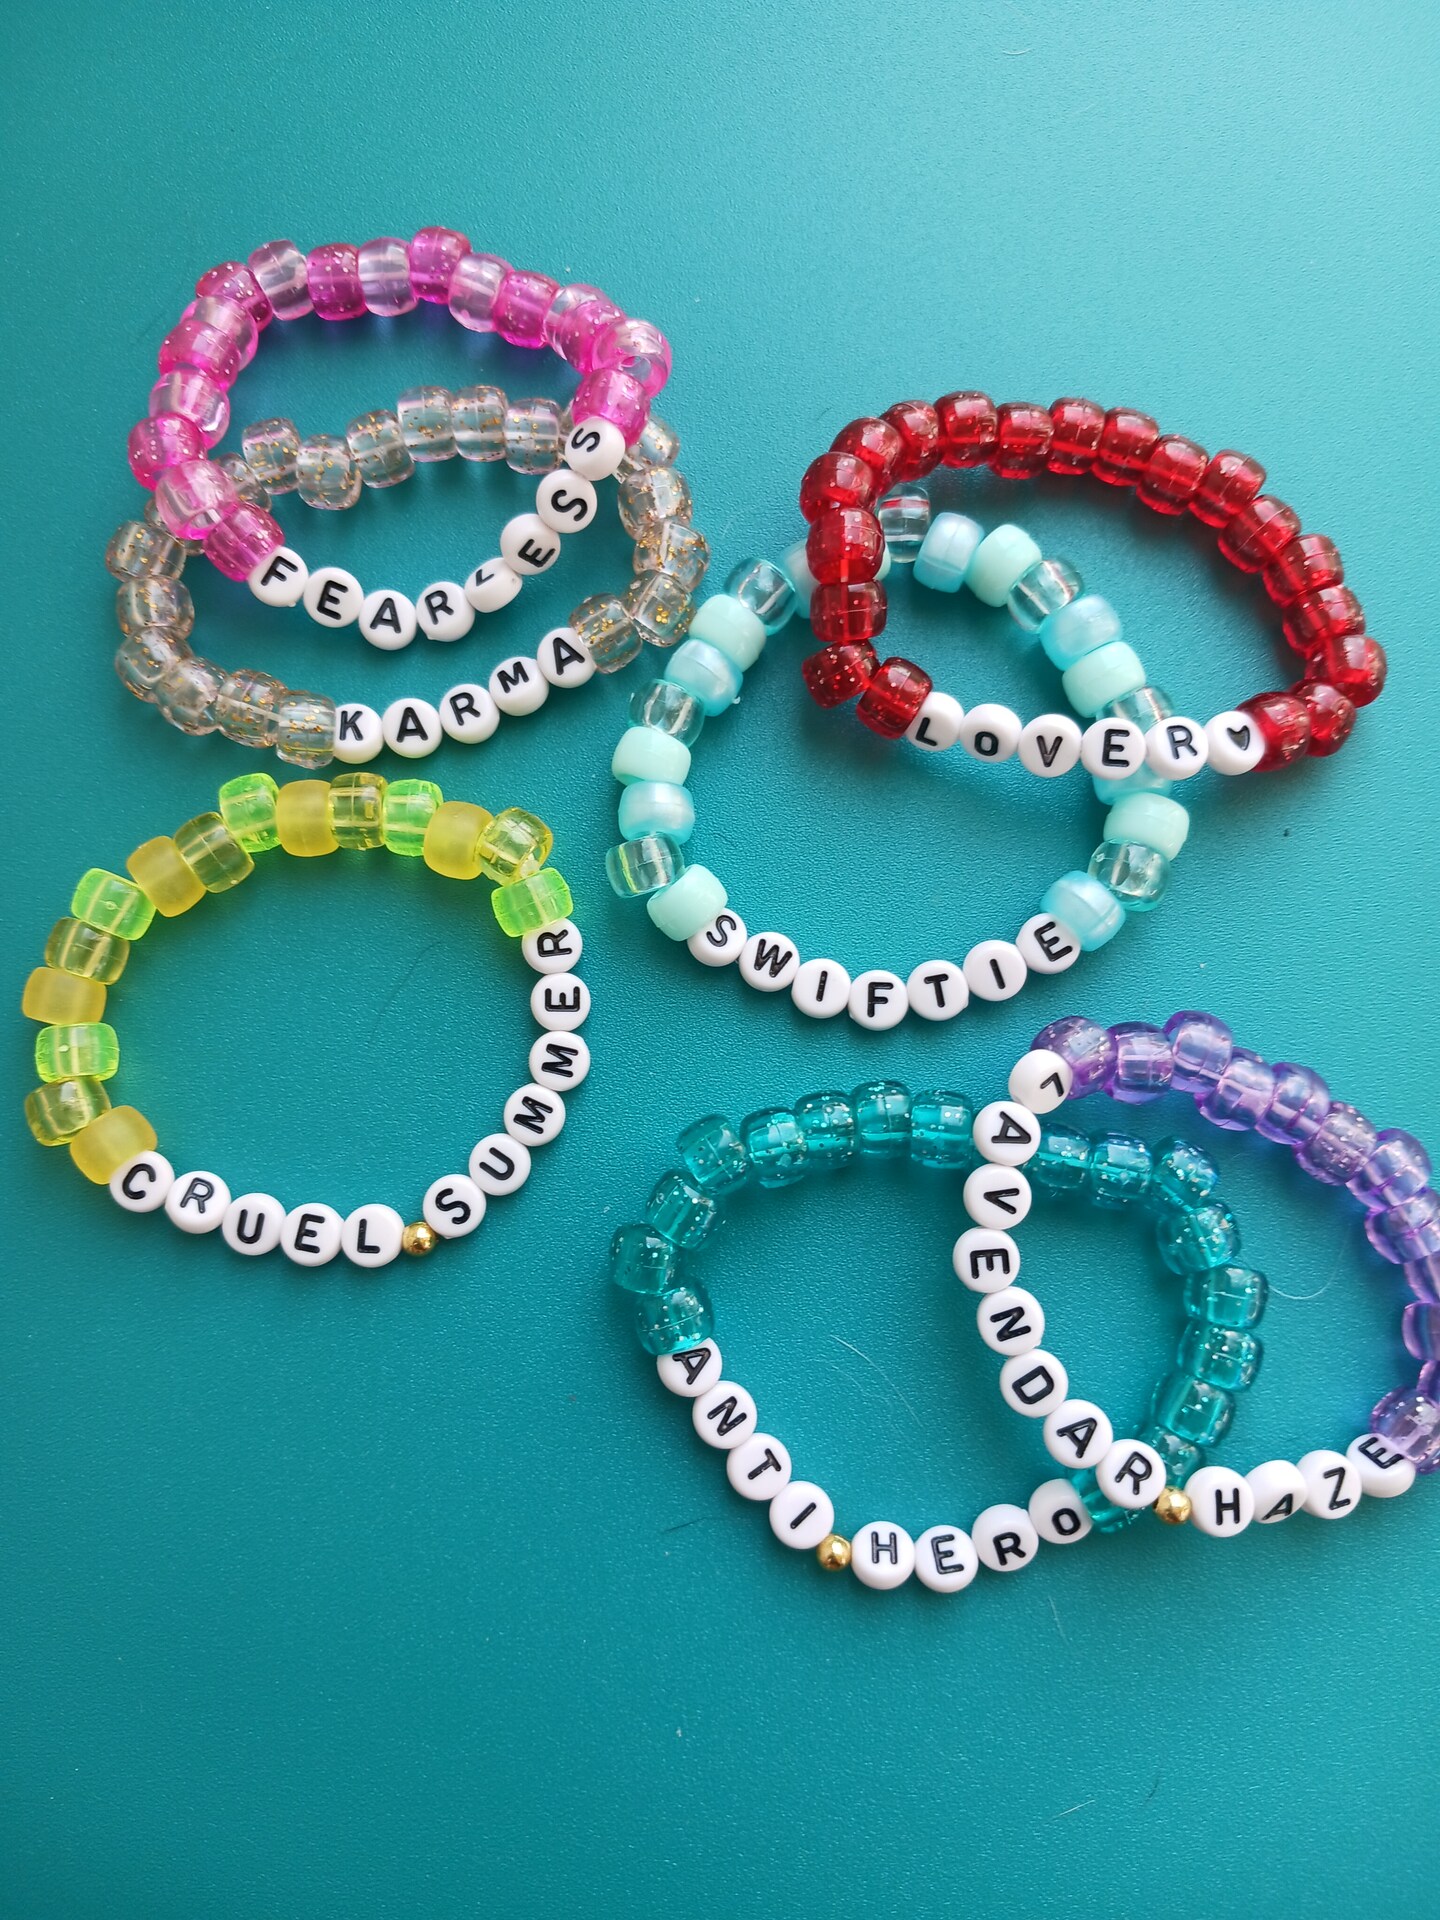 Taylor Swift Eras Tour: Friendship bracelets to buy and trade - Reviewed